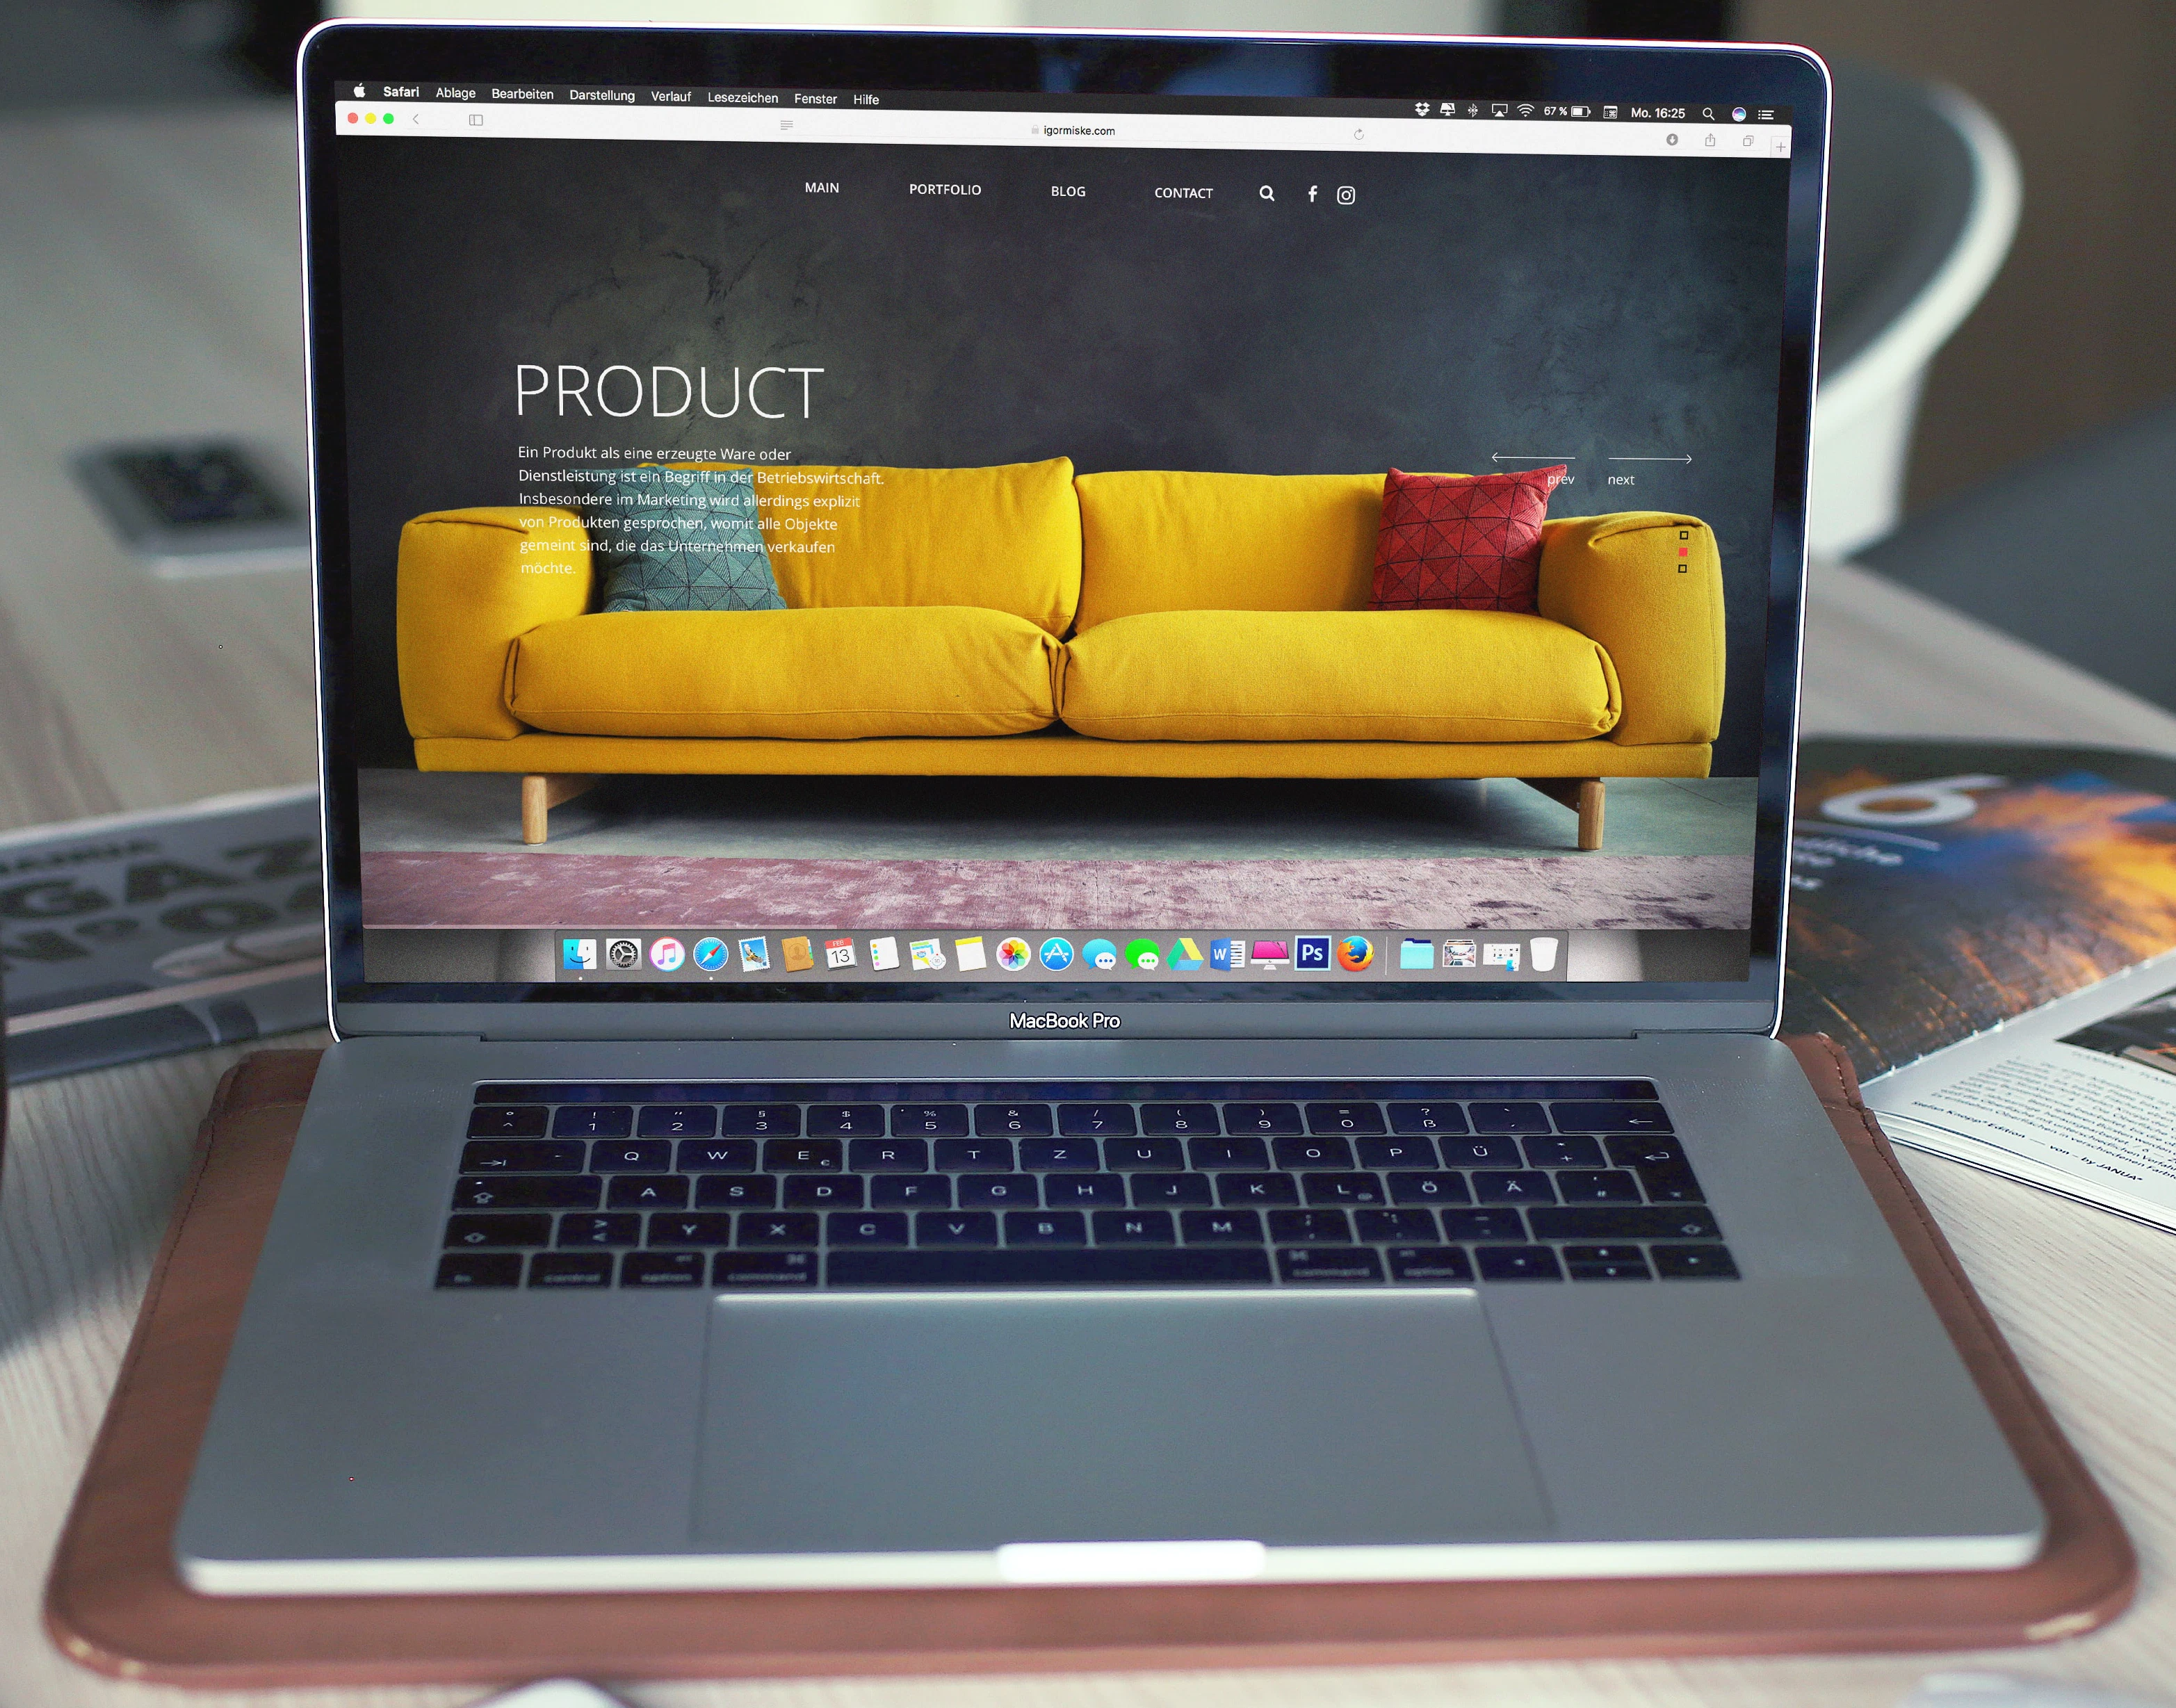 image of a yellow couch for sale on a laptop